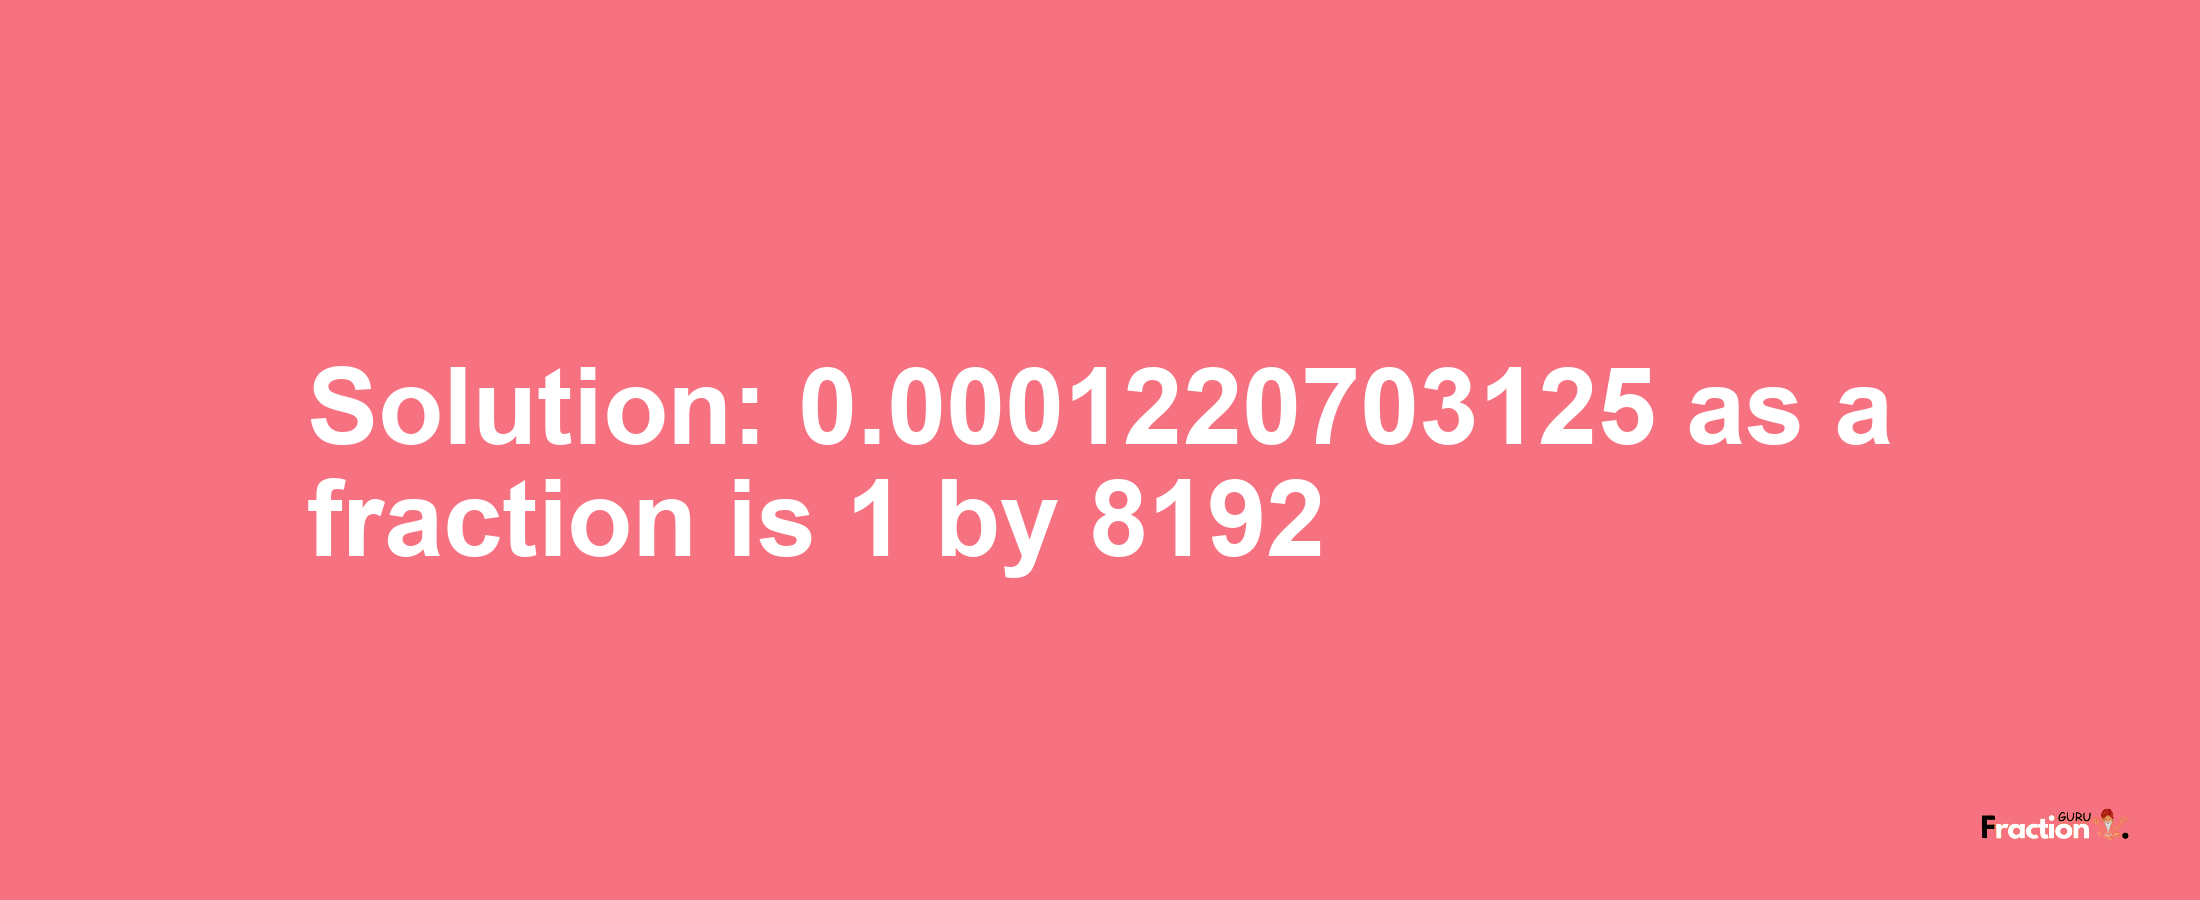 Solution:0.0001220703125 as a fraction is 1/8192